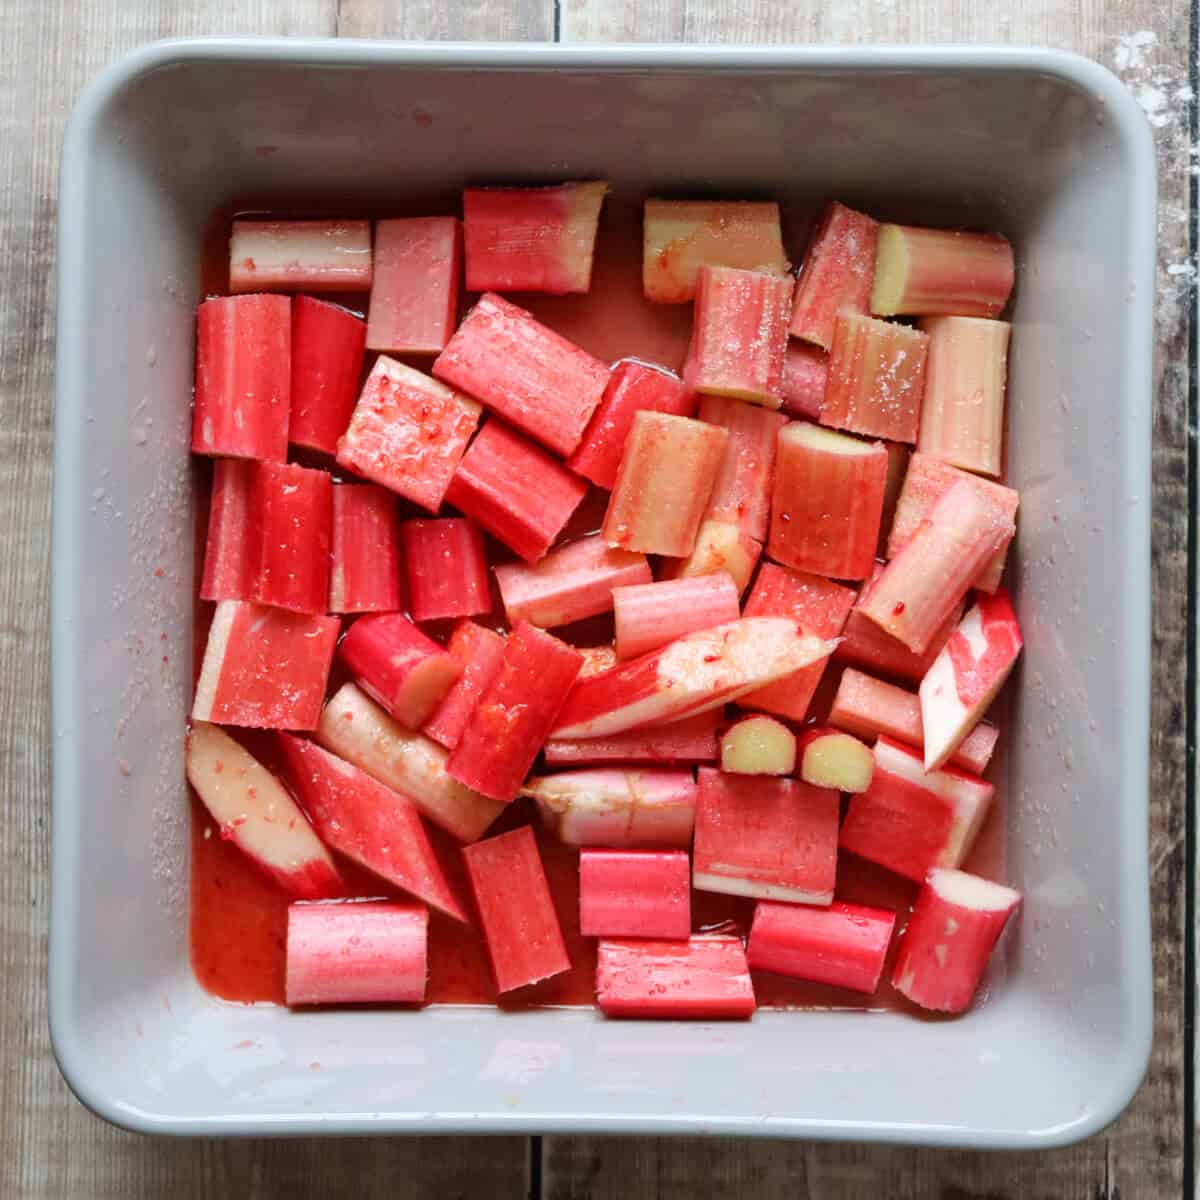 An oven proof dish full of pieces of rhubarb.